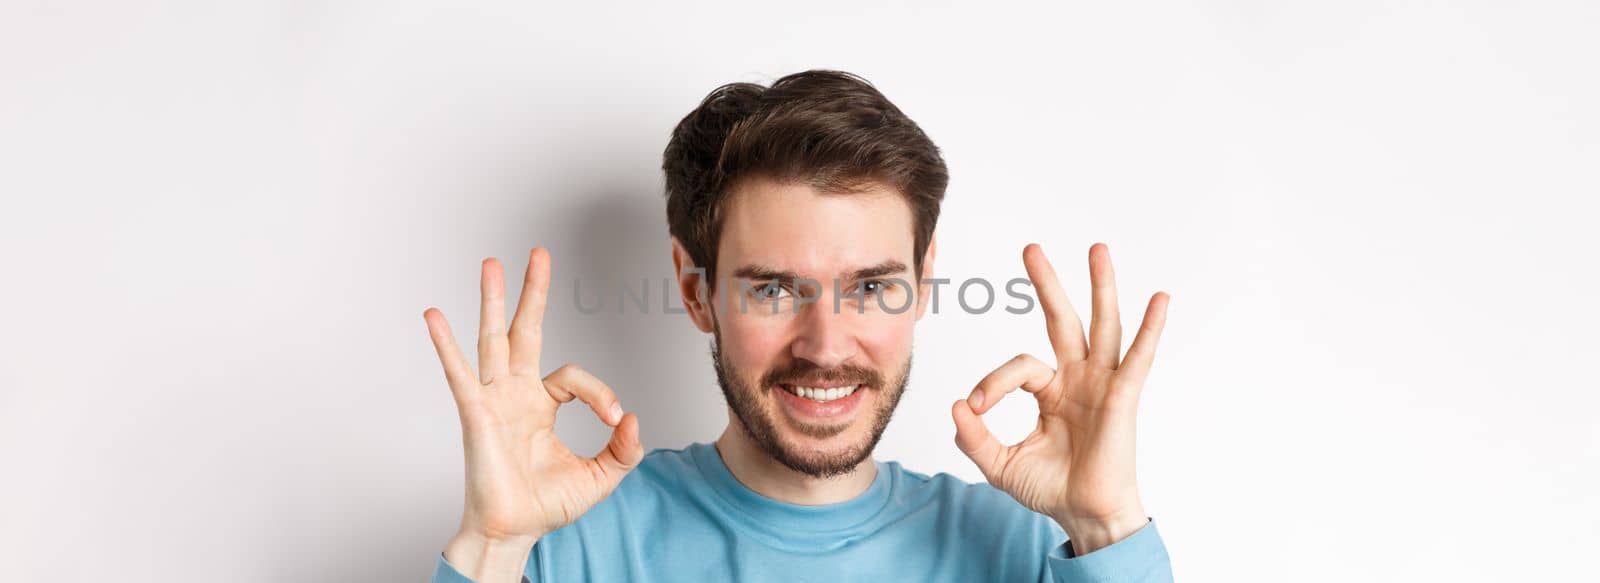 Close-up of confident young man smiling, showing okay signs, praising excellent choice, approve something good, standing over white background.